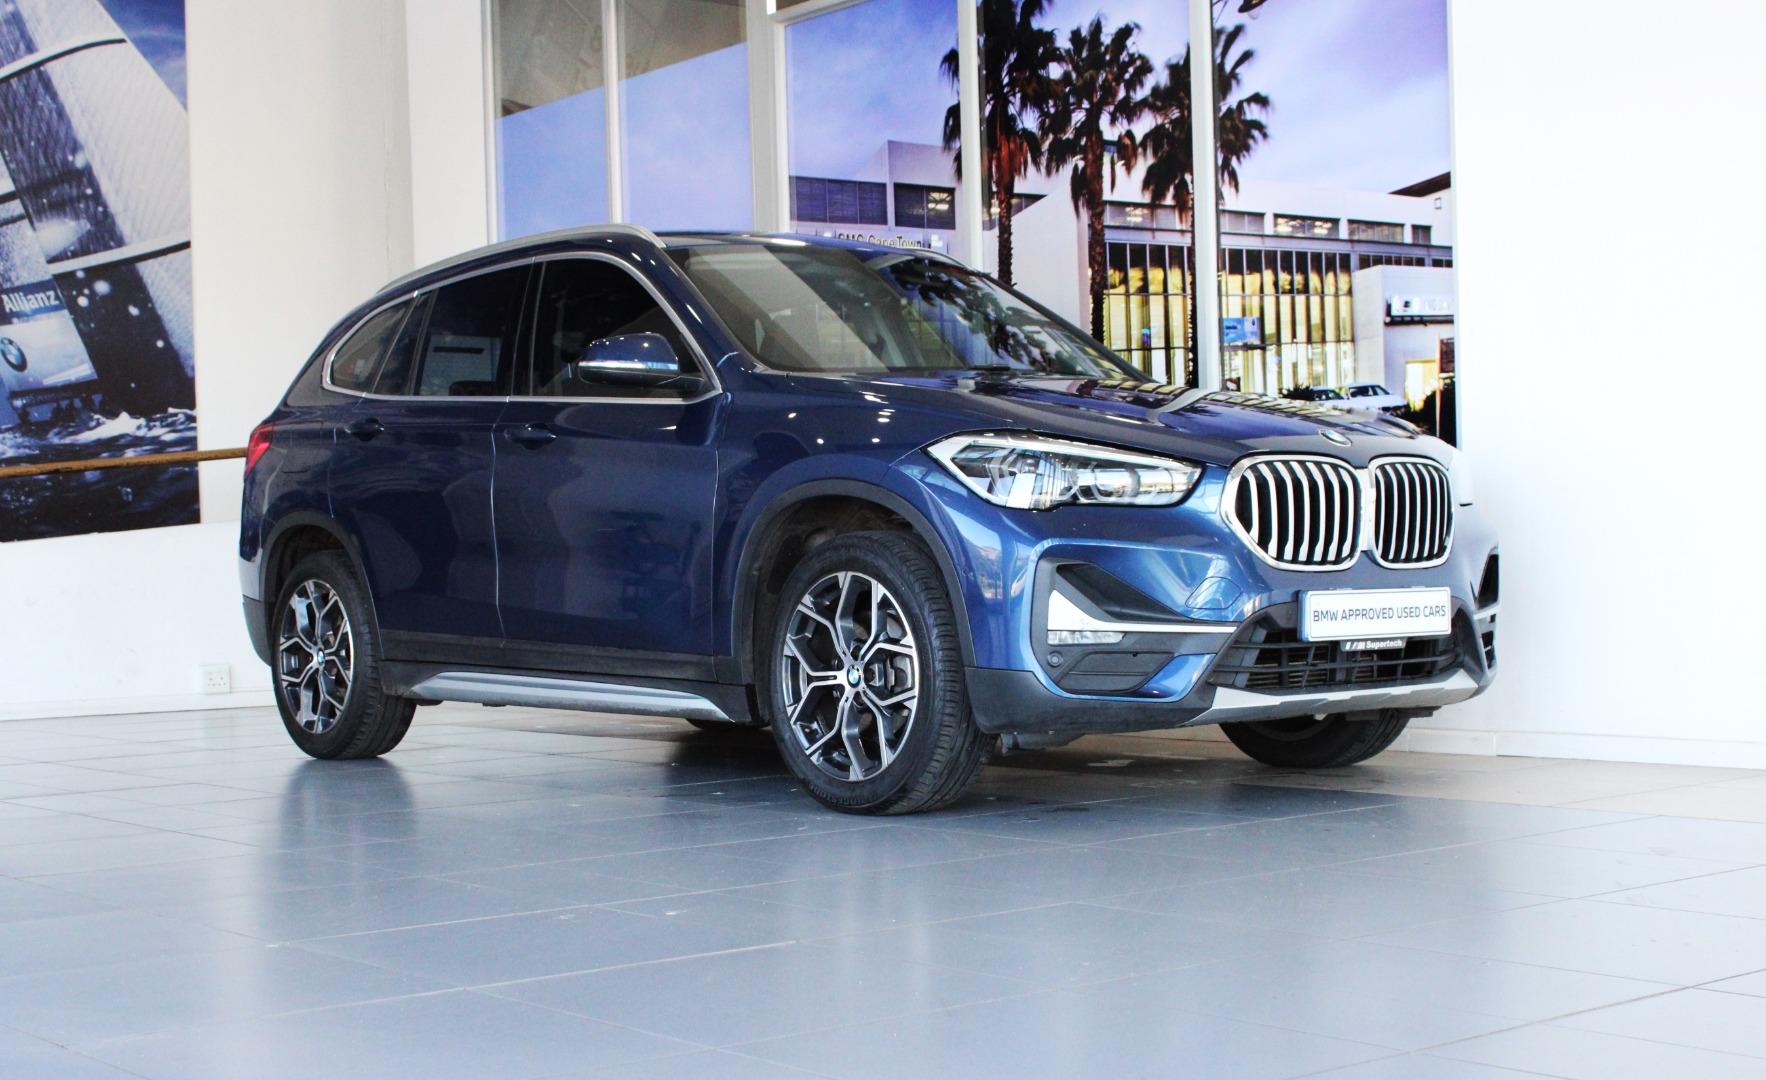 2020 BMW X1 sDRIVE18i xLINE AT (F48)  for sale - SMG12|USED|115383